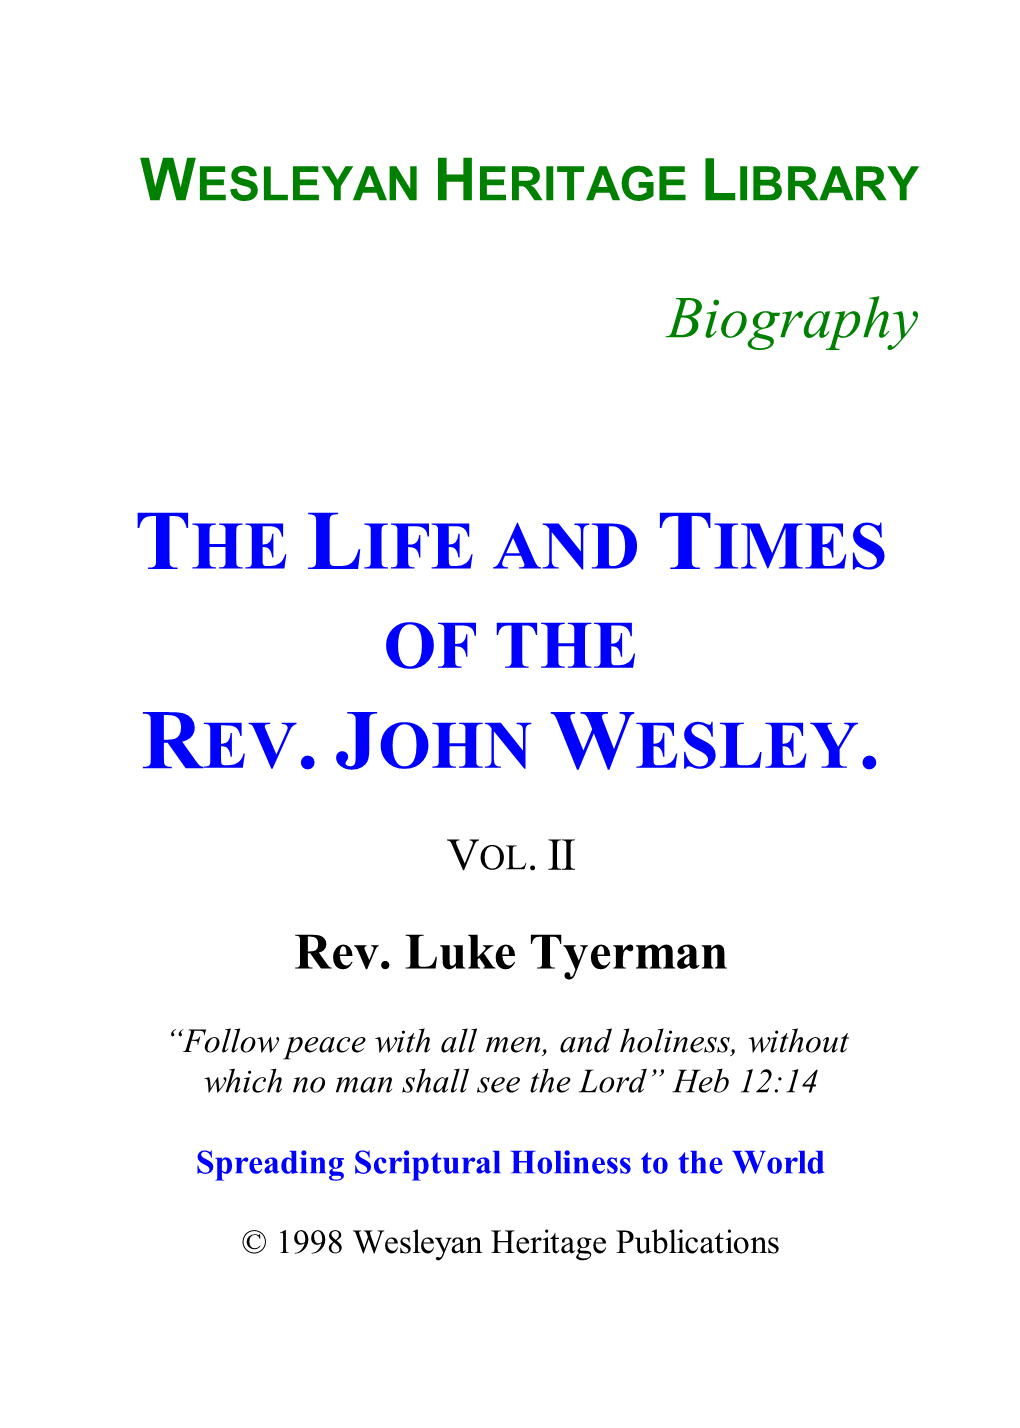 The Life and Times of the Rev. John Wesley, Vol. II